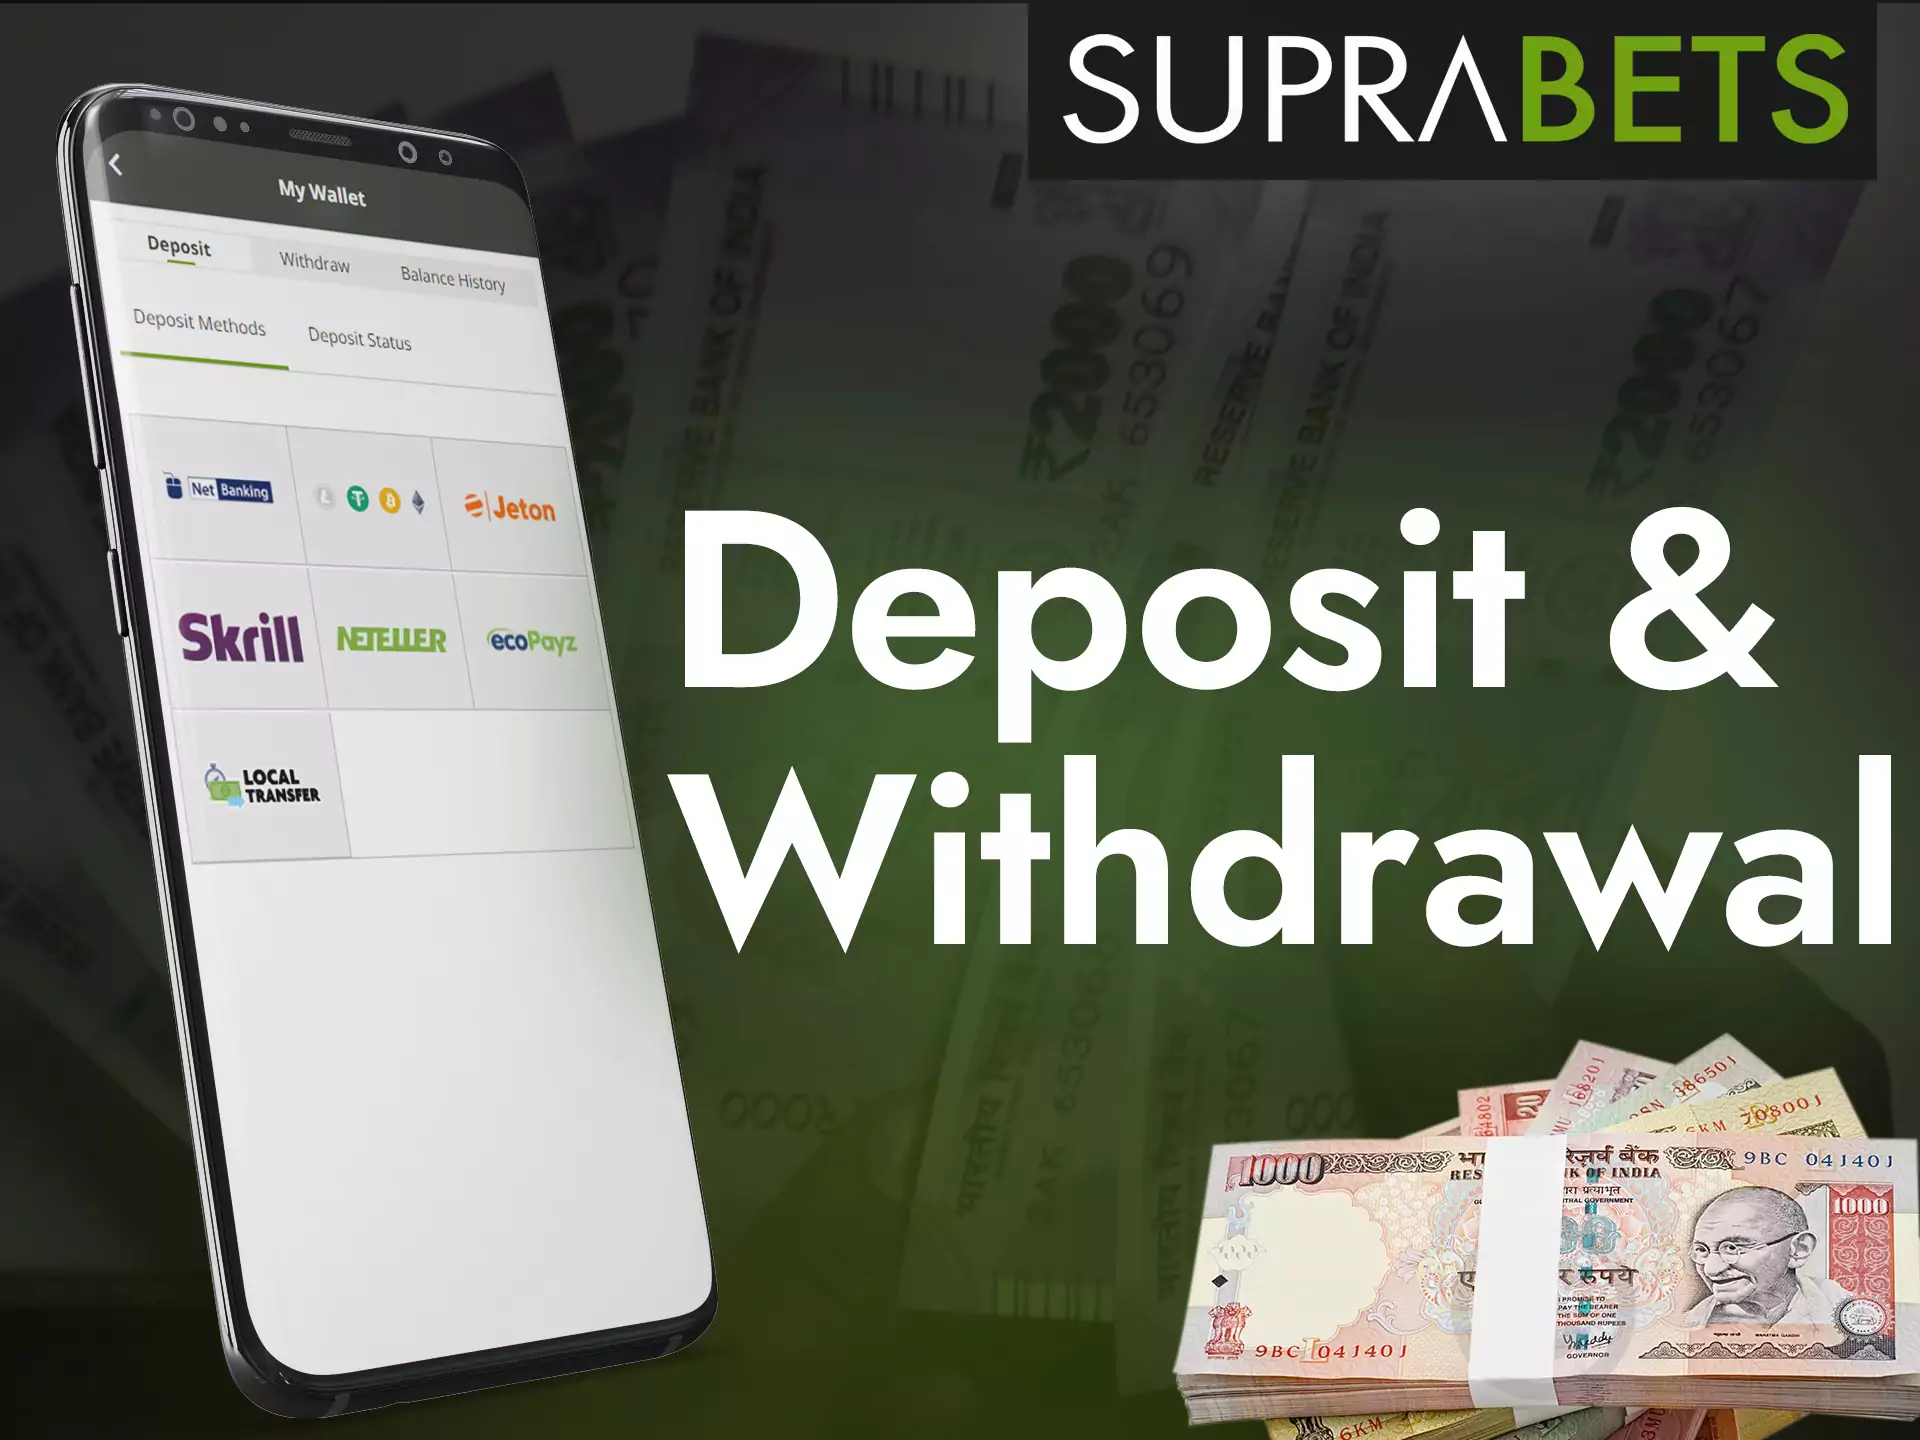 With this instruction, learn how to deposit your account and withdraw money from Suprabets without difficulty.